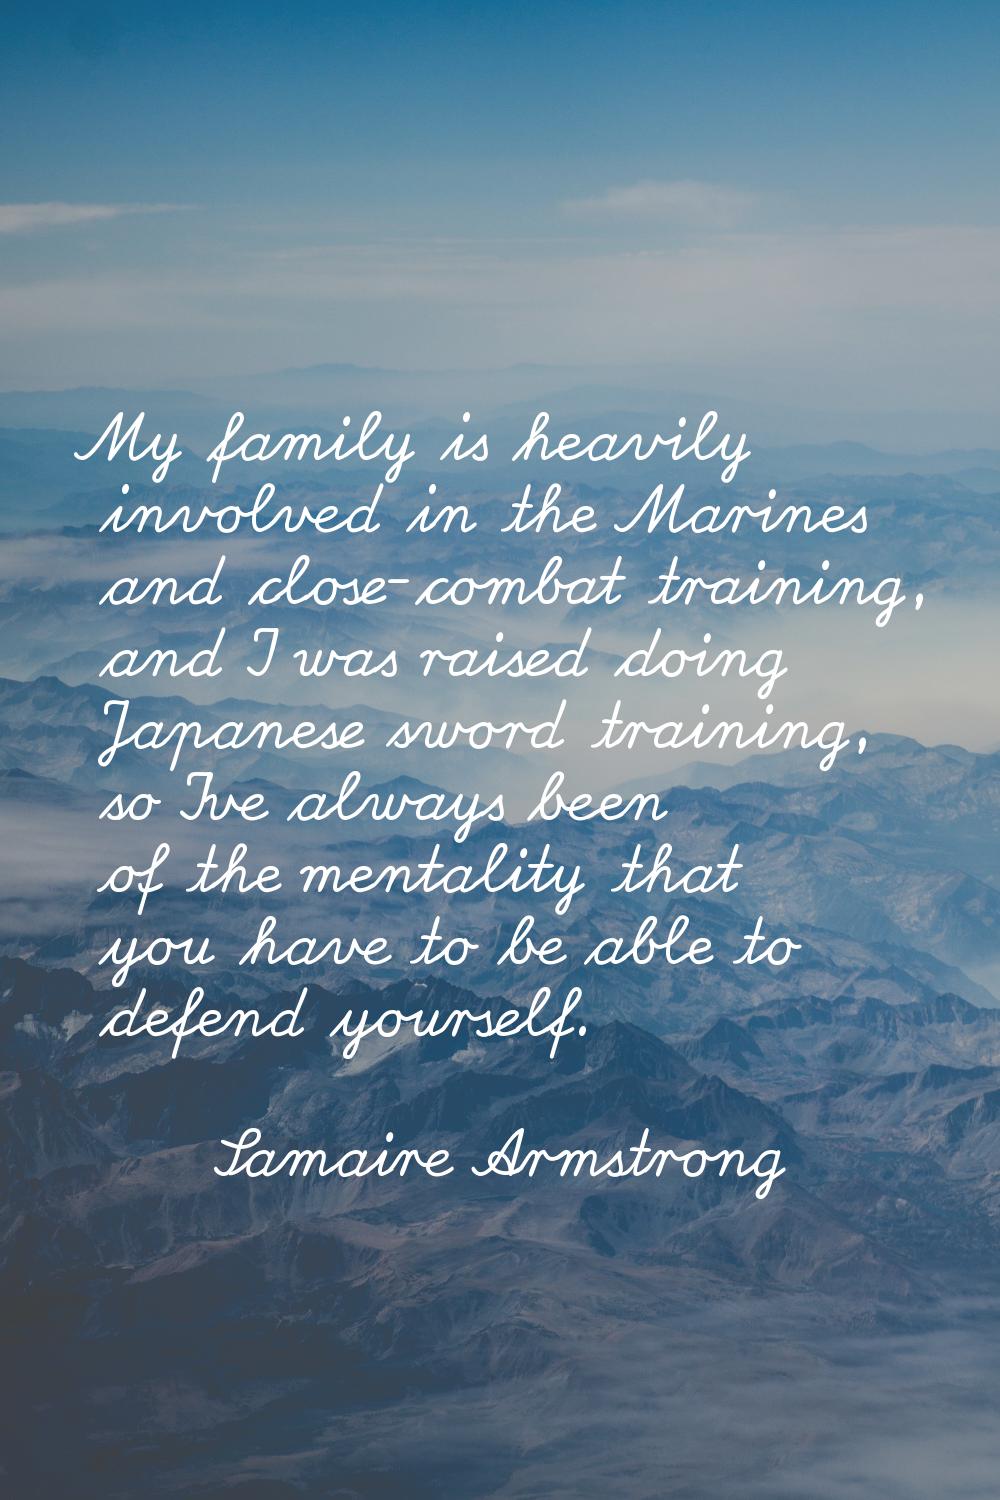 My family is heavily involved in the Marines and close-combat training, and I was raised doing Japa